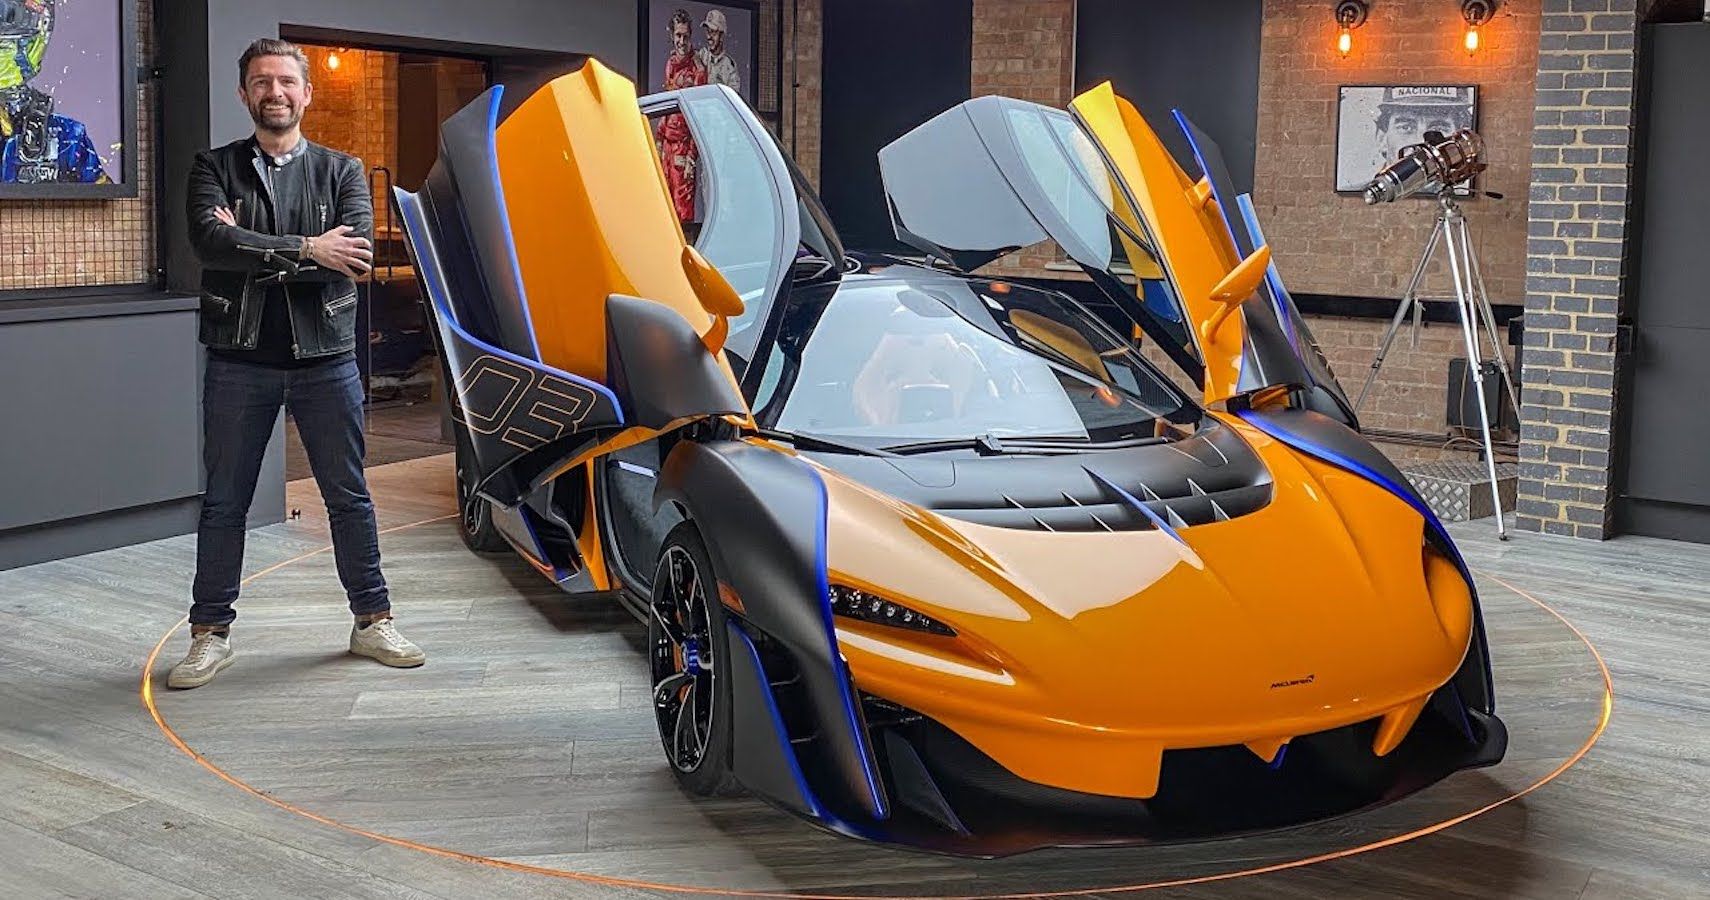 Get To Know The Extreme McLaren Sabre Supercar With This In-Depth Breakdown